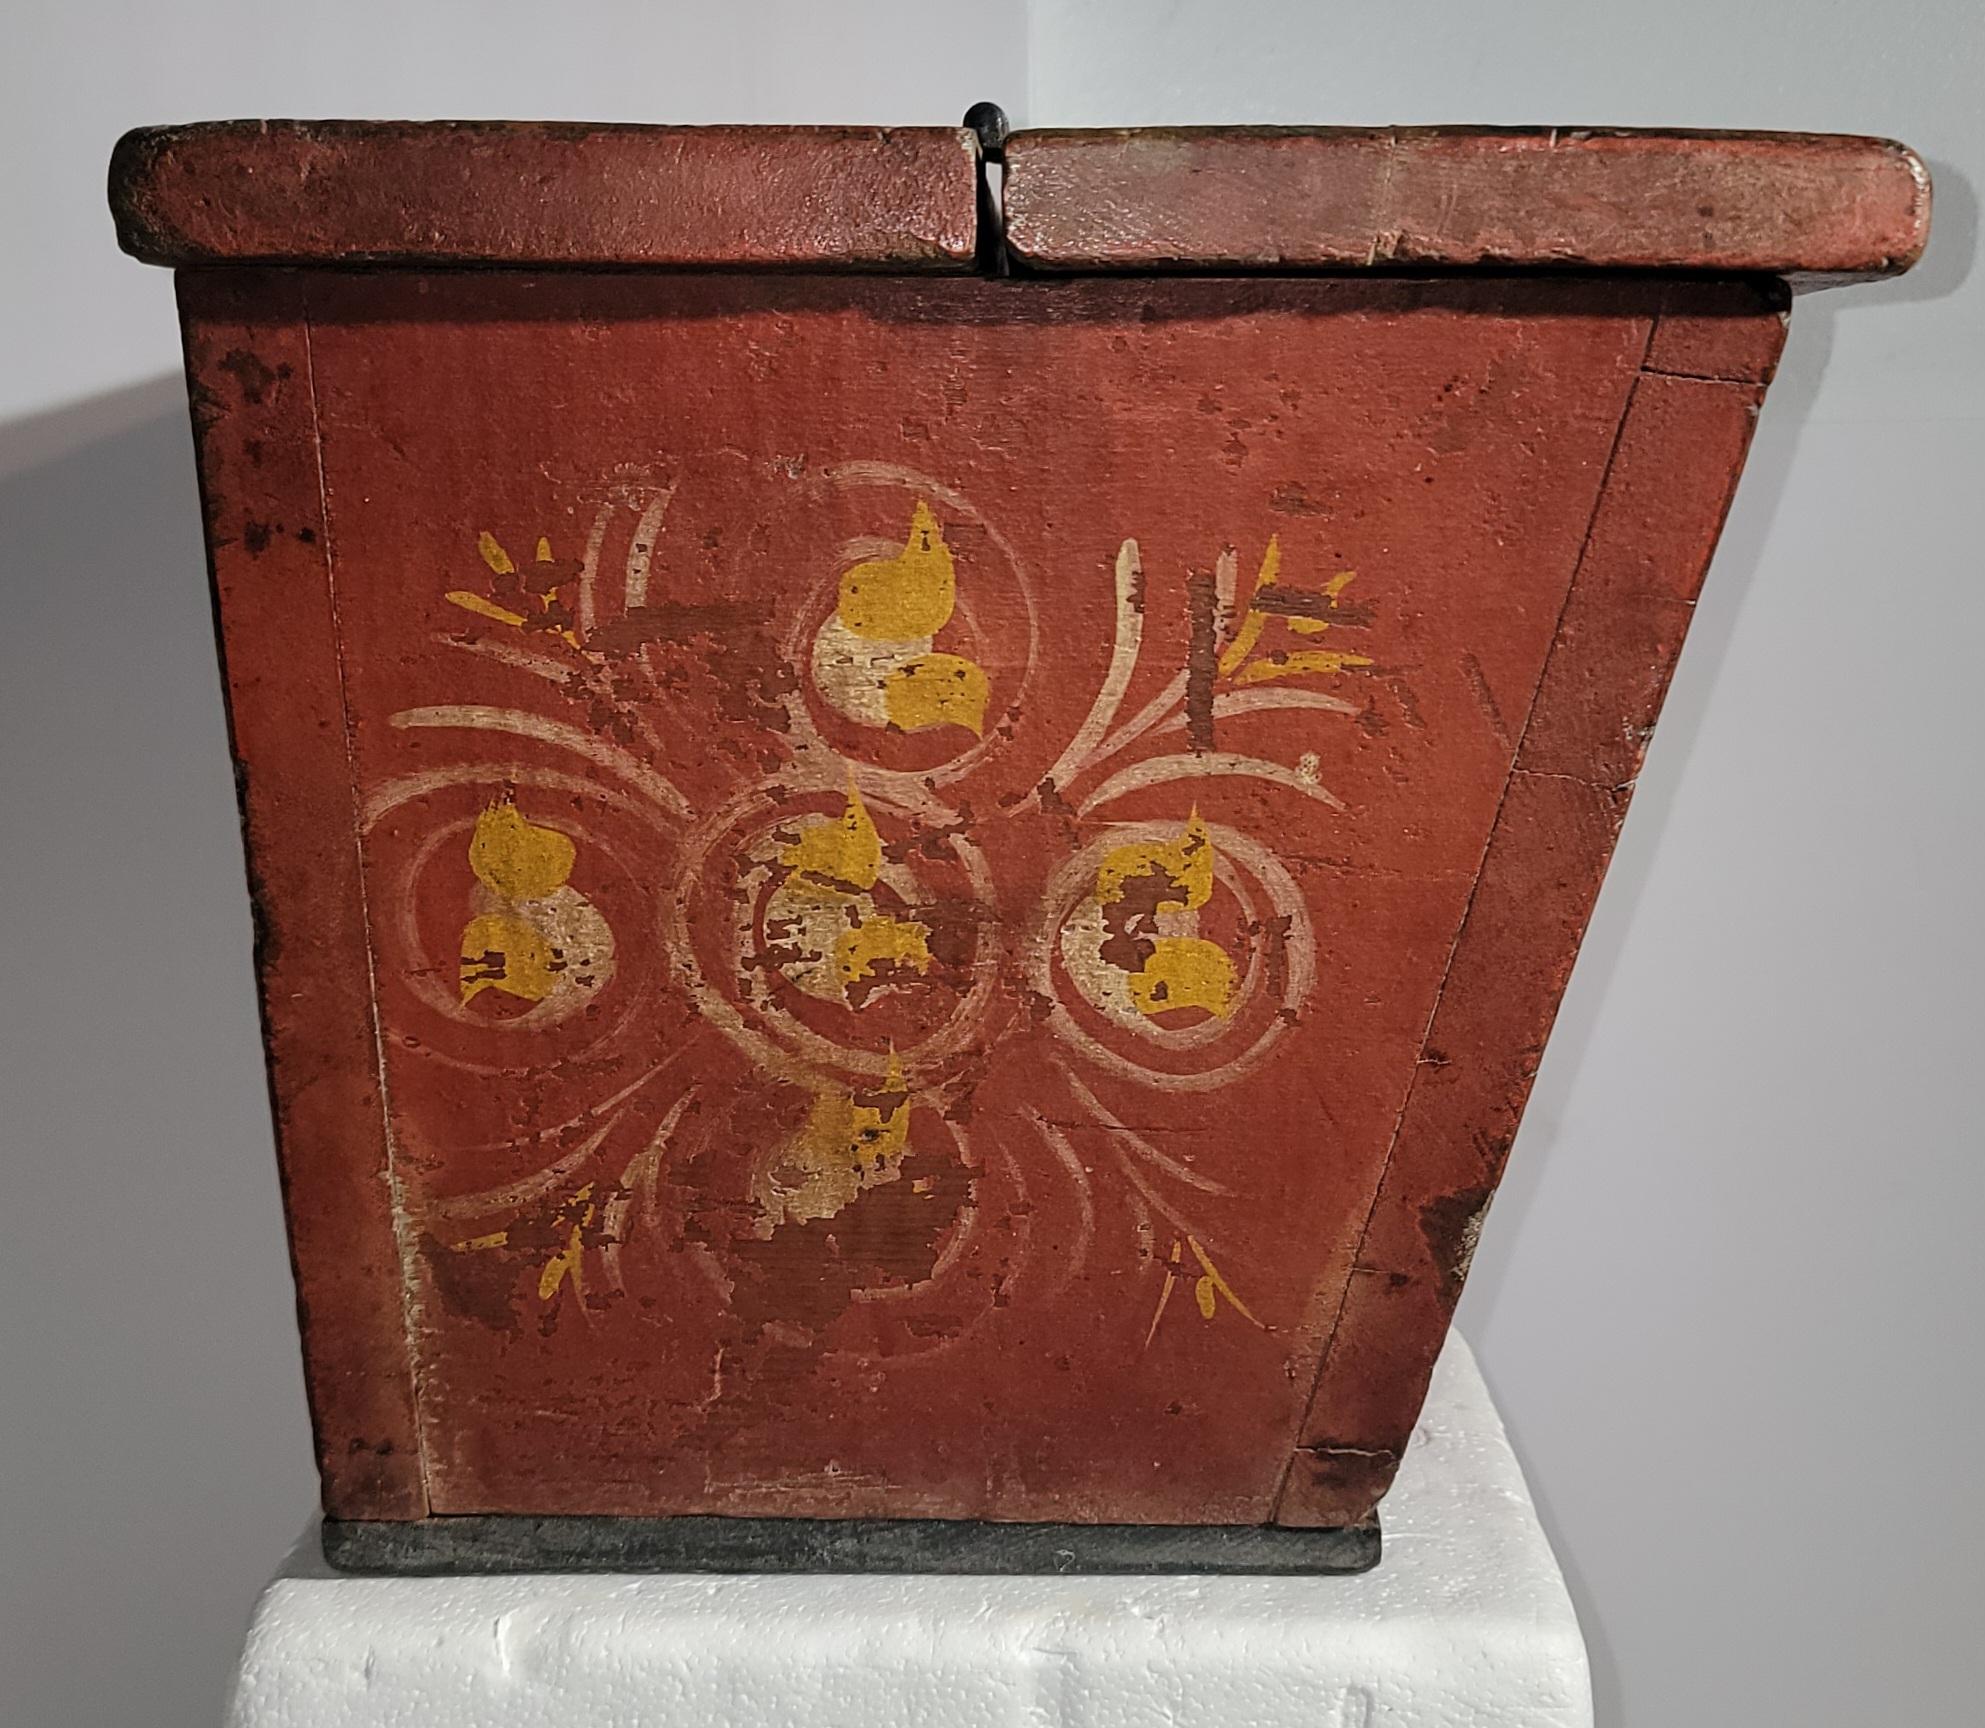 19th century Original paint decorated buggy box that was used for mail and important documents.The condition is very good and strong painted surface. The paint has a Pennsylvania German influence.